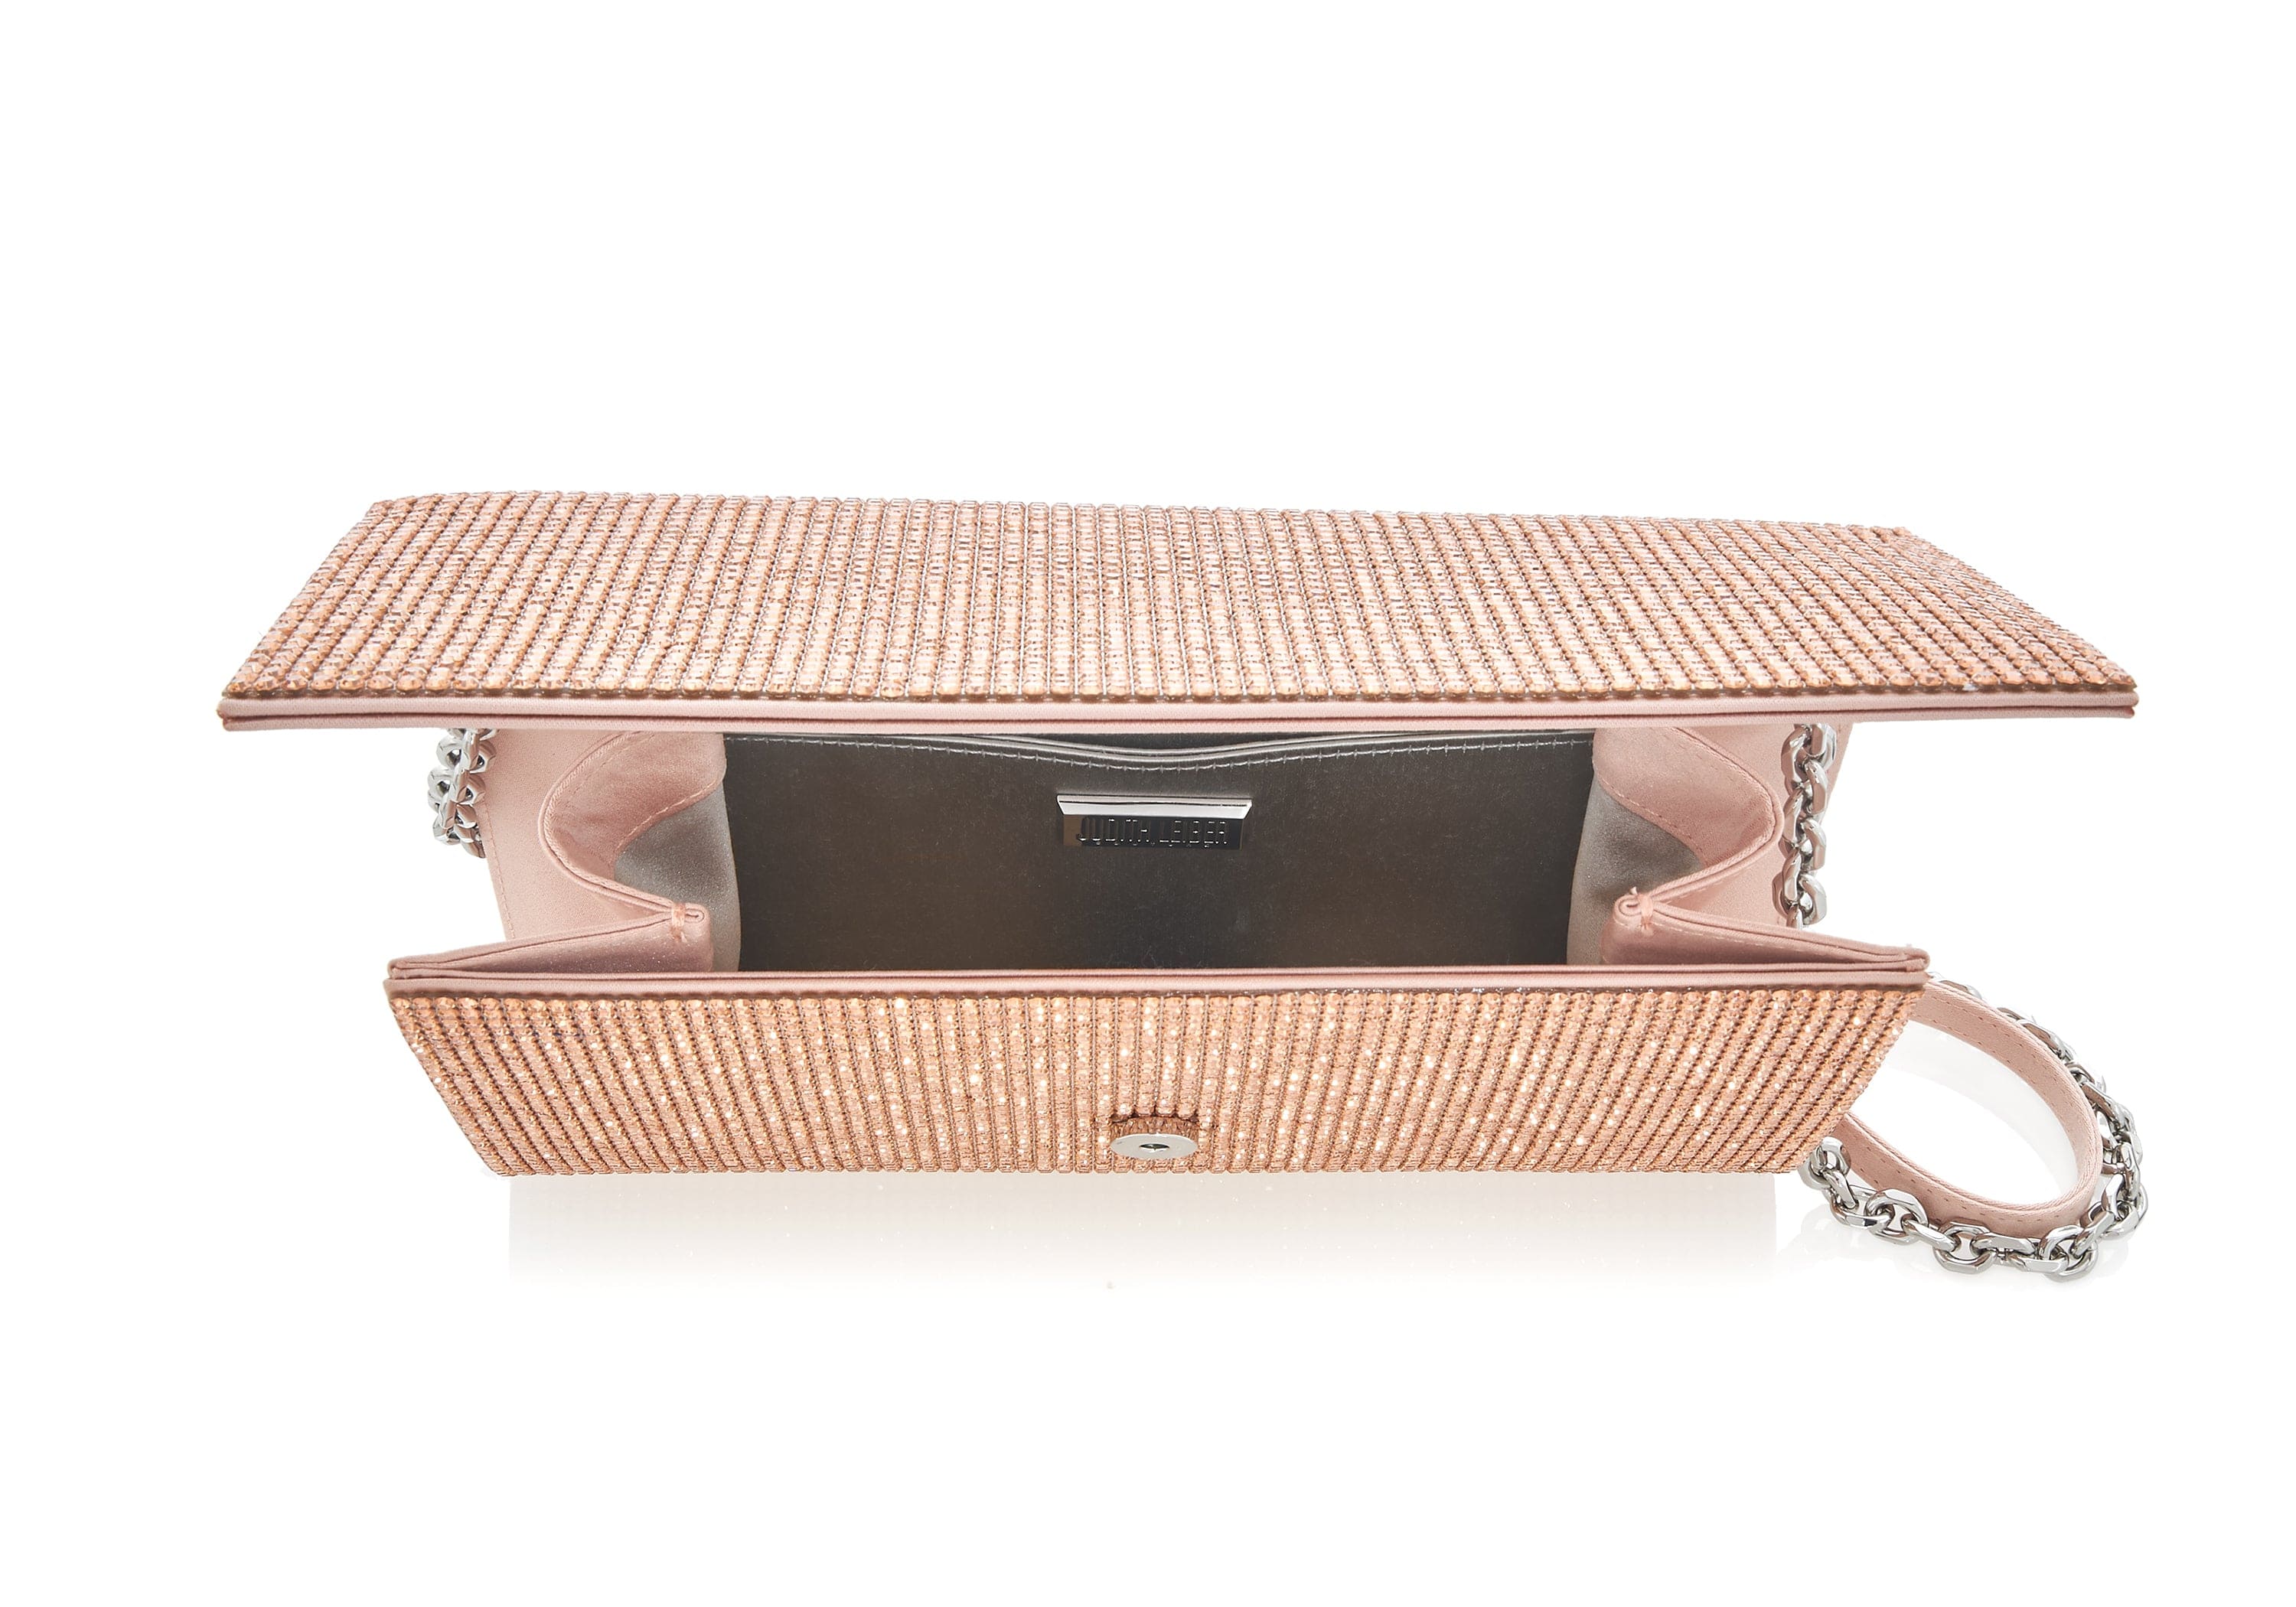 JUDITH LEIBER COUTURE - Rose Romance crystal-embellished brass clutch bag